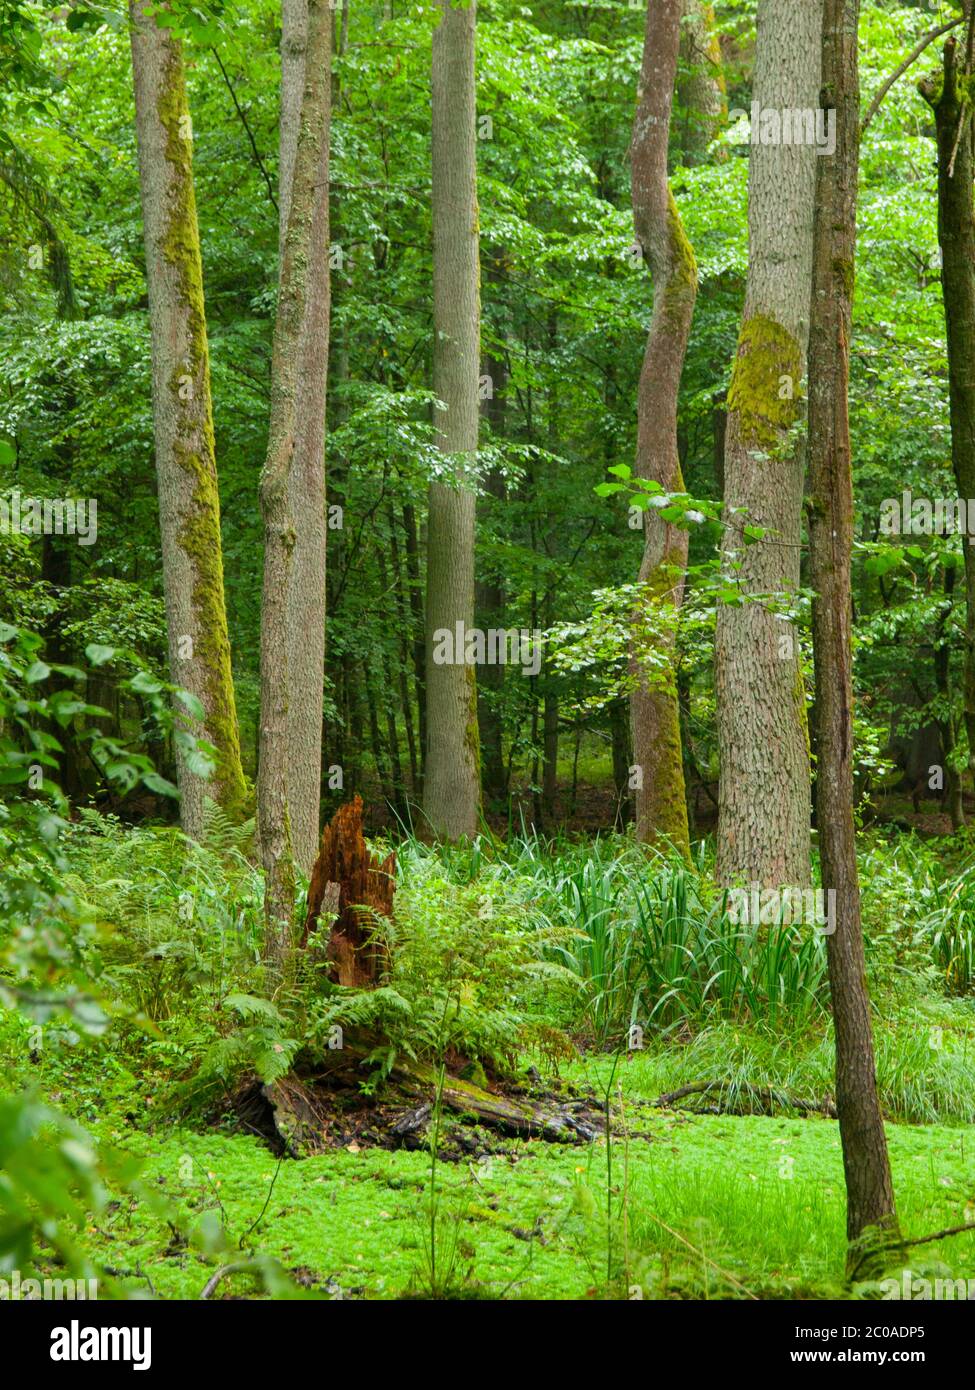 Trees and stumps in the greenery of Bialowieza primeval forest, Poland Stock Photo